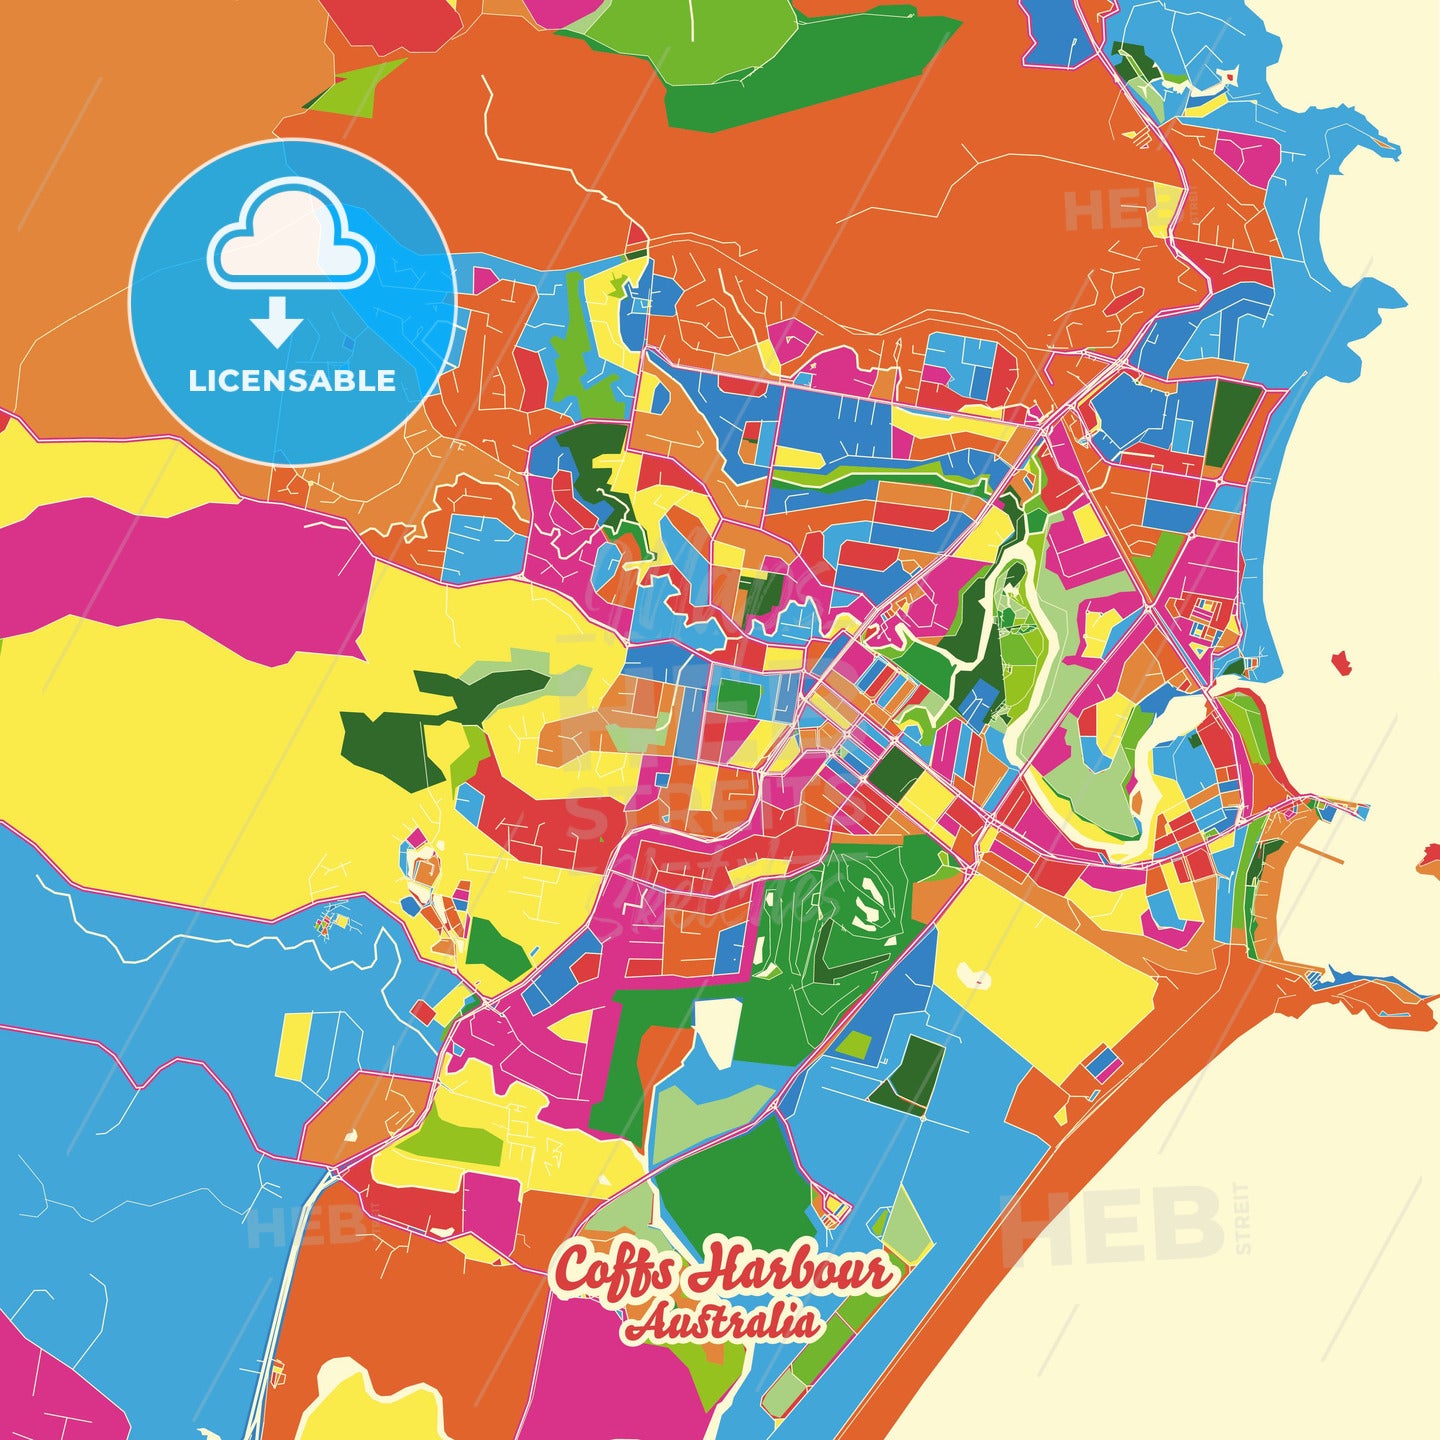 Coffs Harbour, Australia Crazy Colorful Street Map Poster Template - HEBSTREITS Sketches